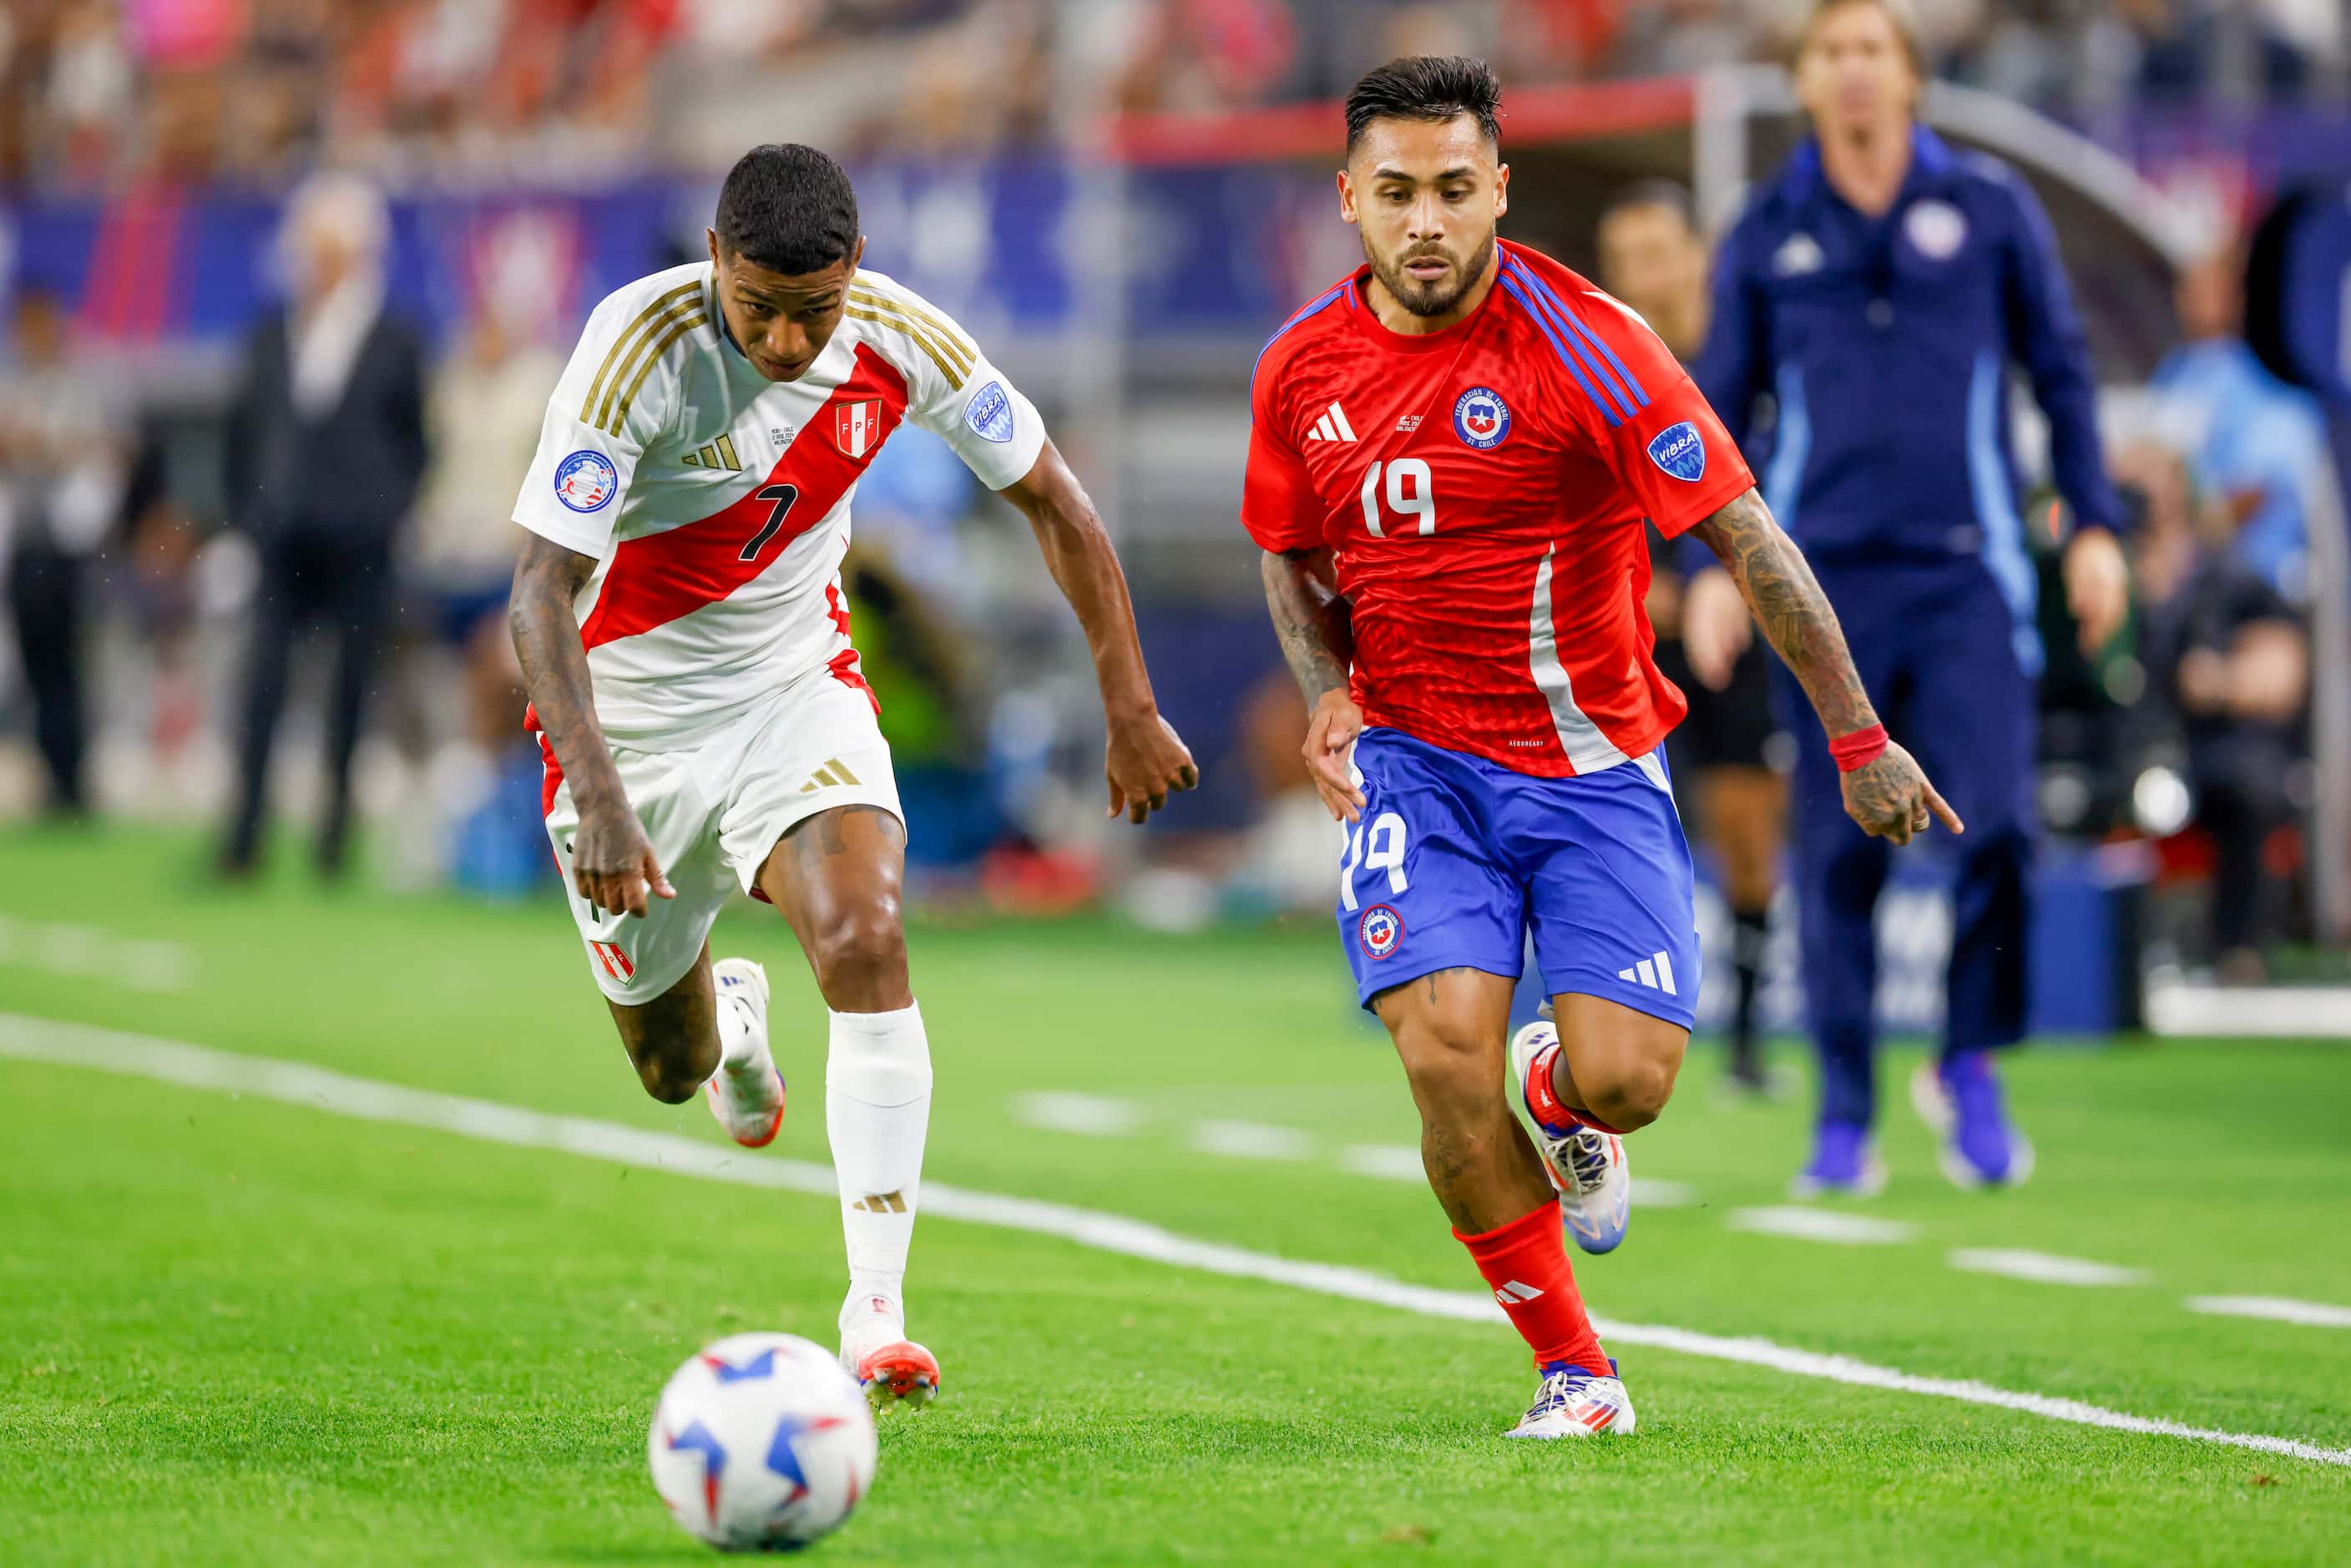 Chile forward Marcos Bolados (19) races down the field ahead of Peru forward Andy Polo (7)...